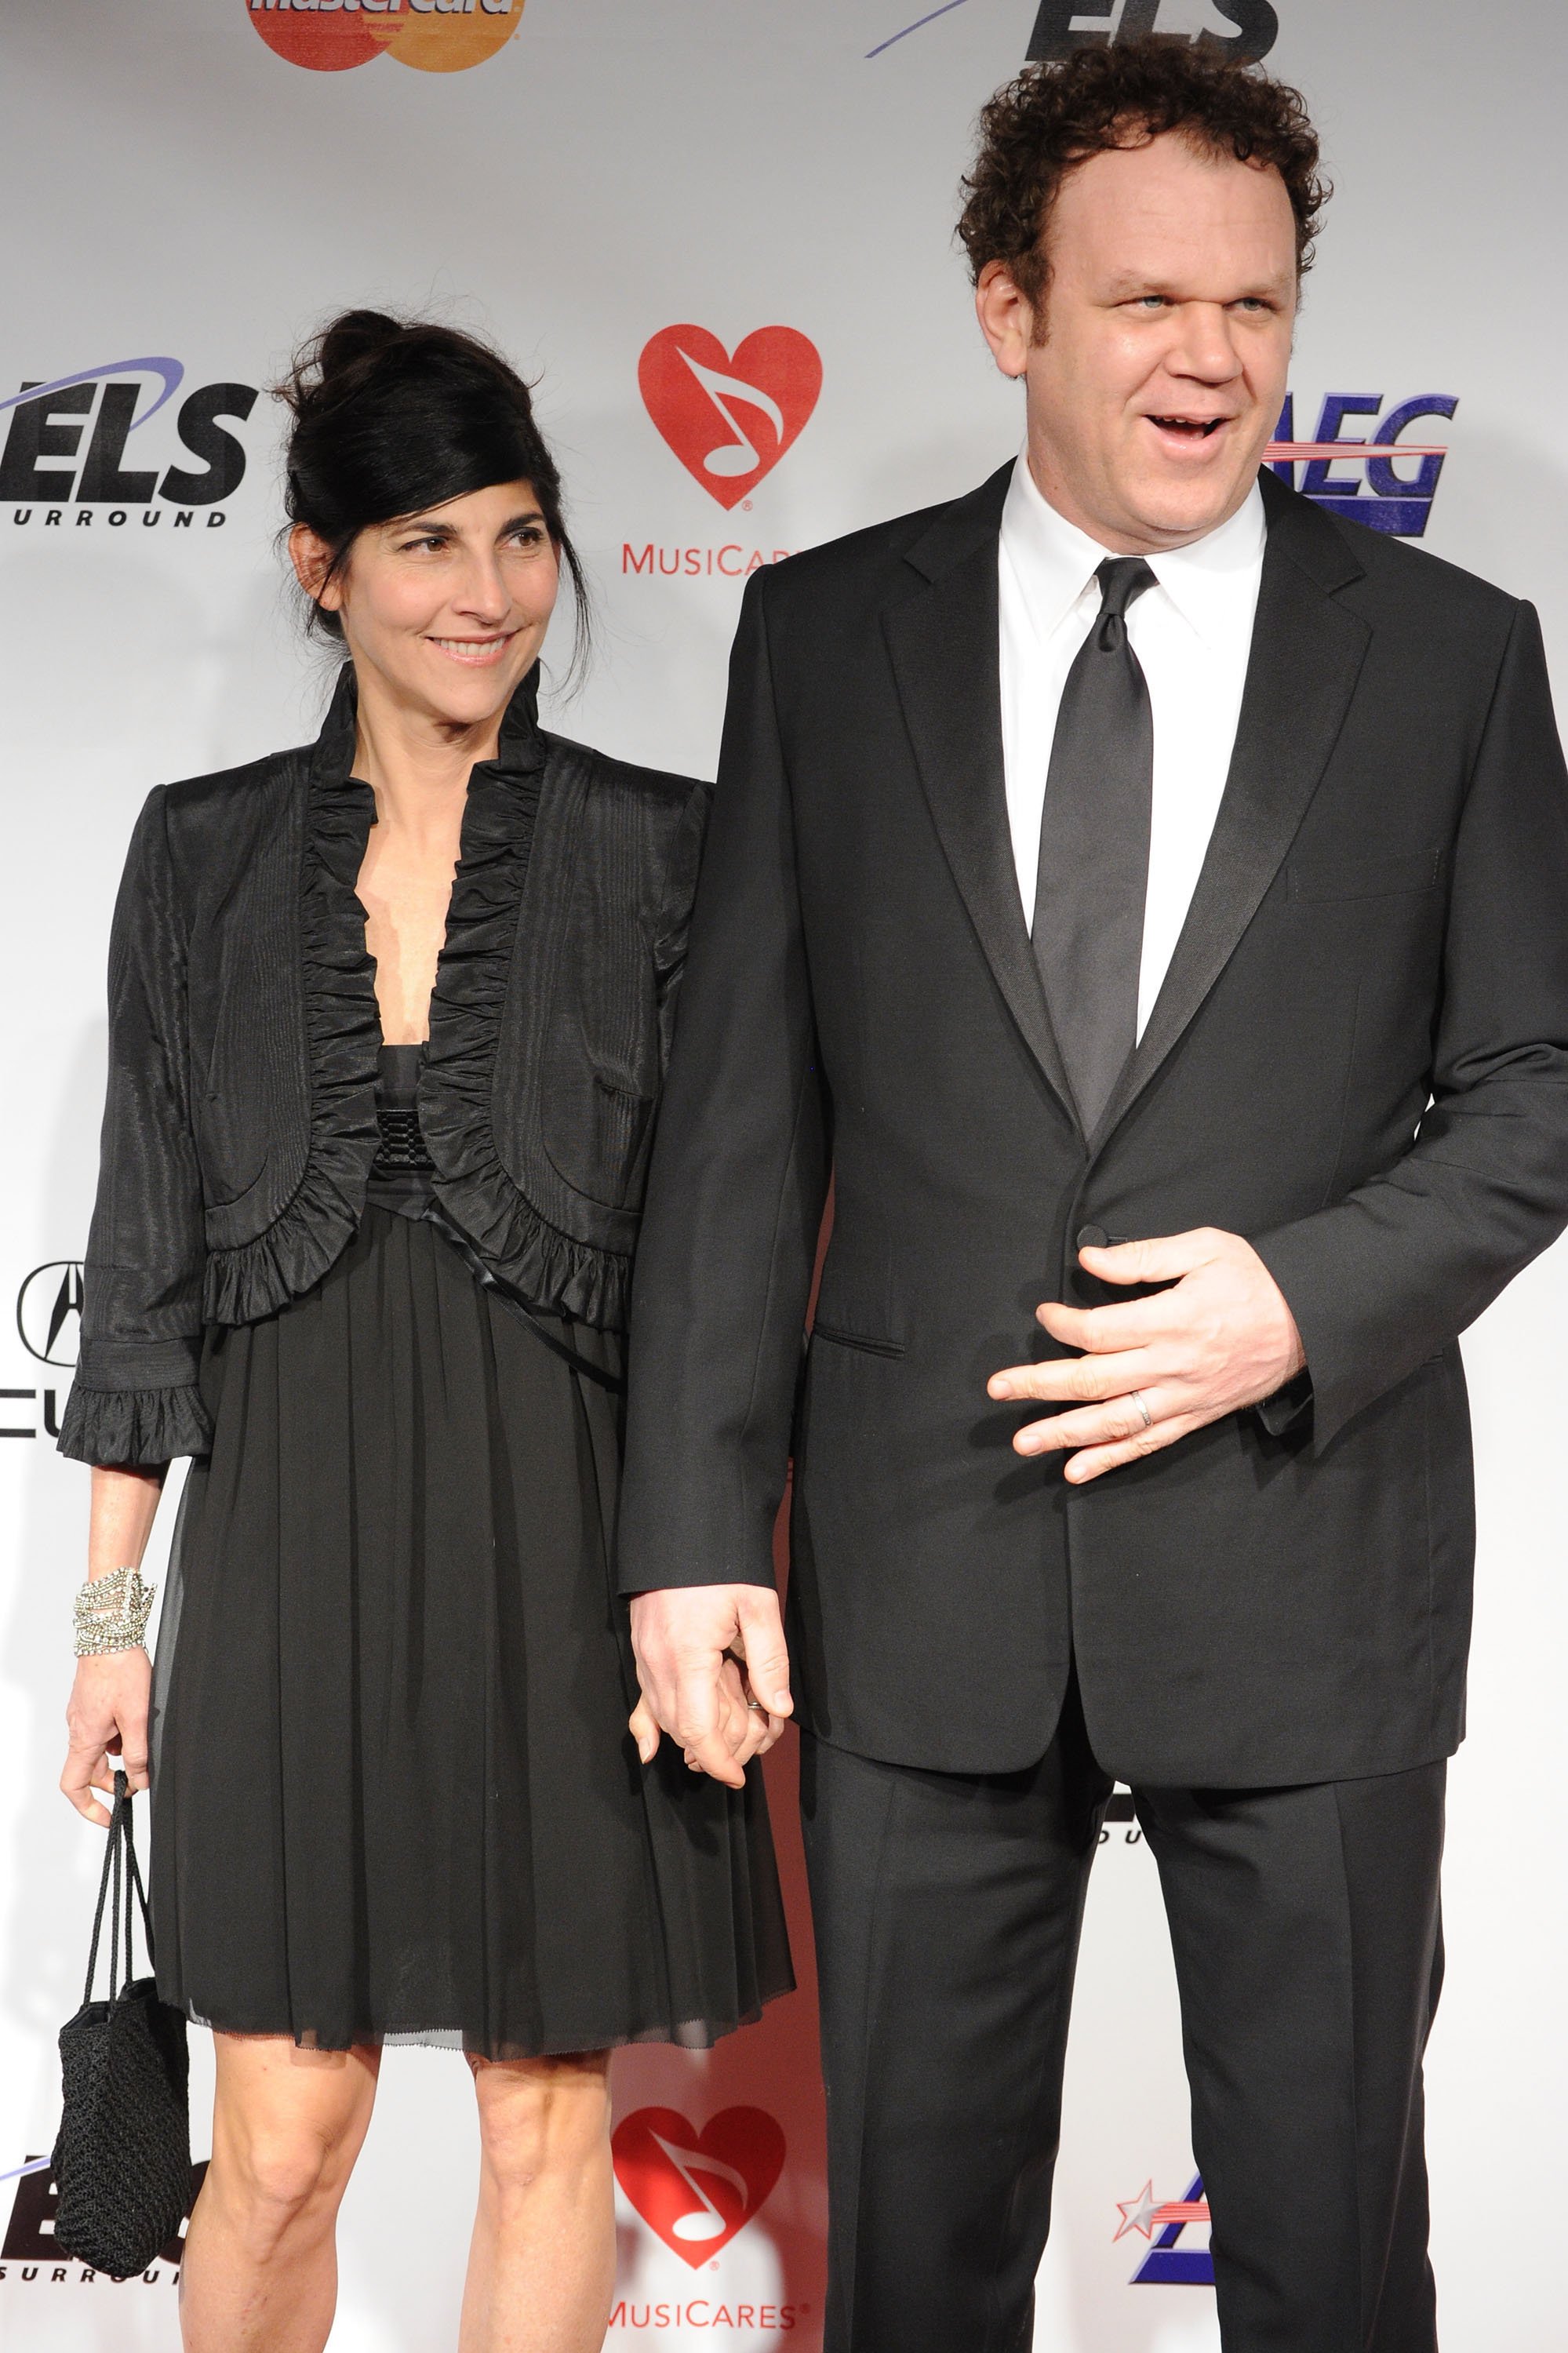 Actor John C. Reilly (R) and wife Alison Dickey arrive at 2010 MusiCares Person Of The Year Tribute To Neil Young at the Los Angeles Convention Center on January 29, 2010 in Los Angeles, California. | Source: Getty Images